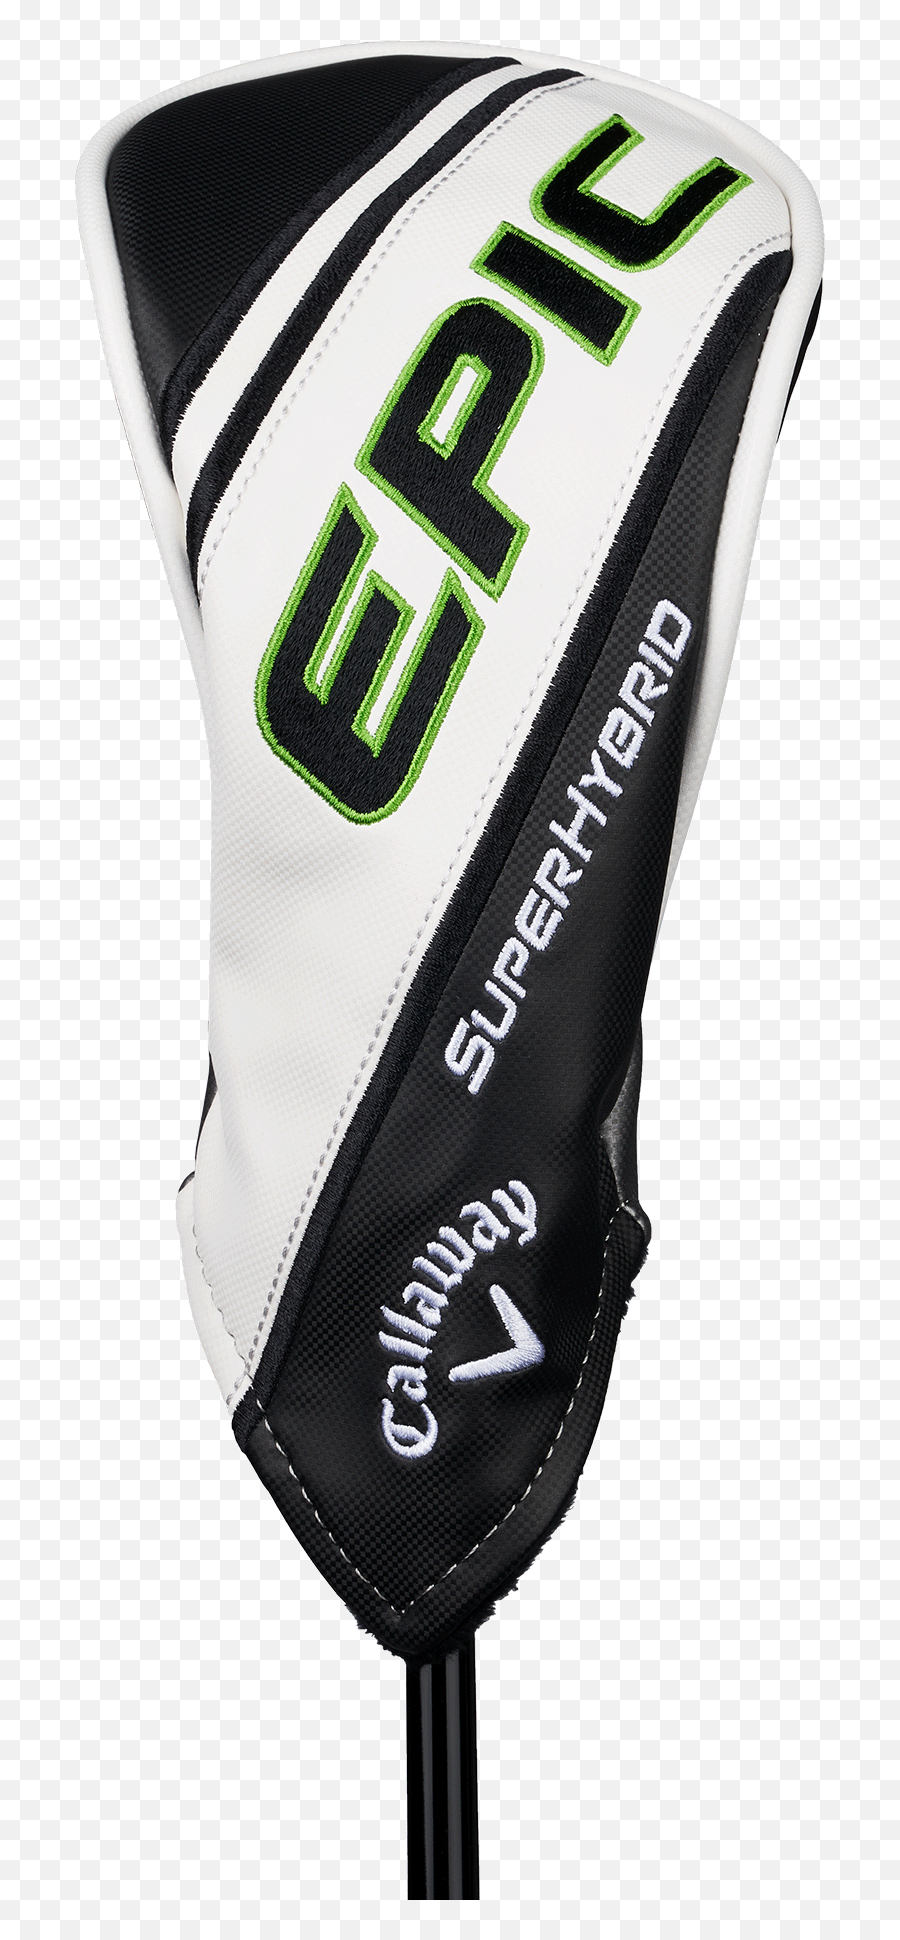 Epic Super Hybrid Specs U0026 Reviews Callaway Golf - Epic Super Hybridheadcover Png,Icon Ti Max Gloves